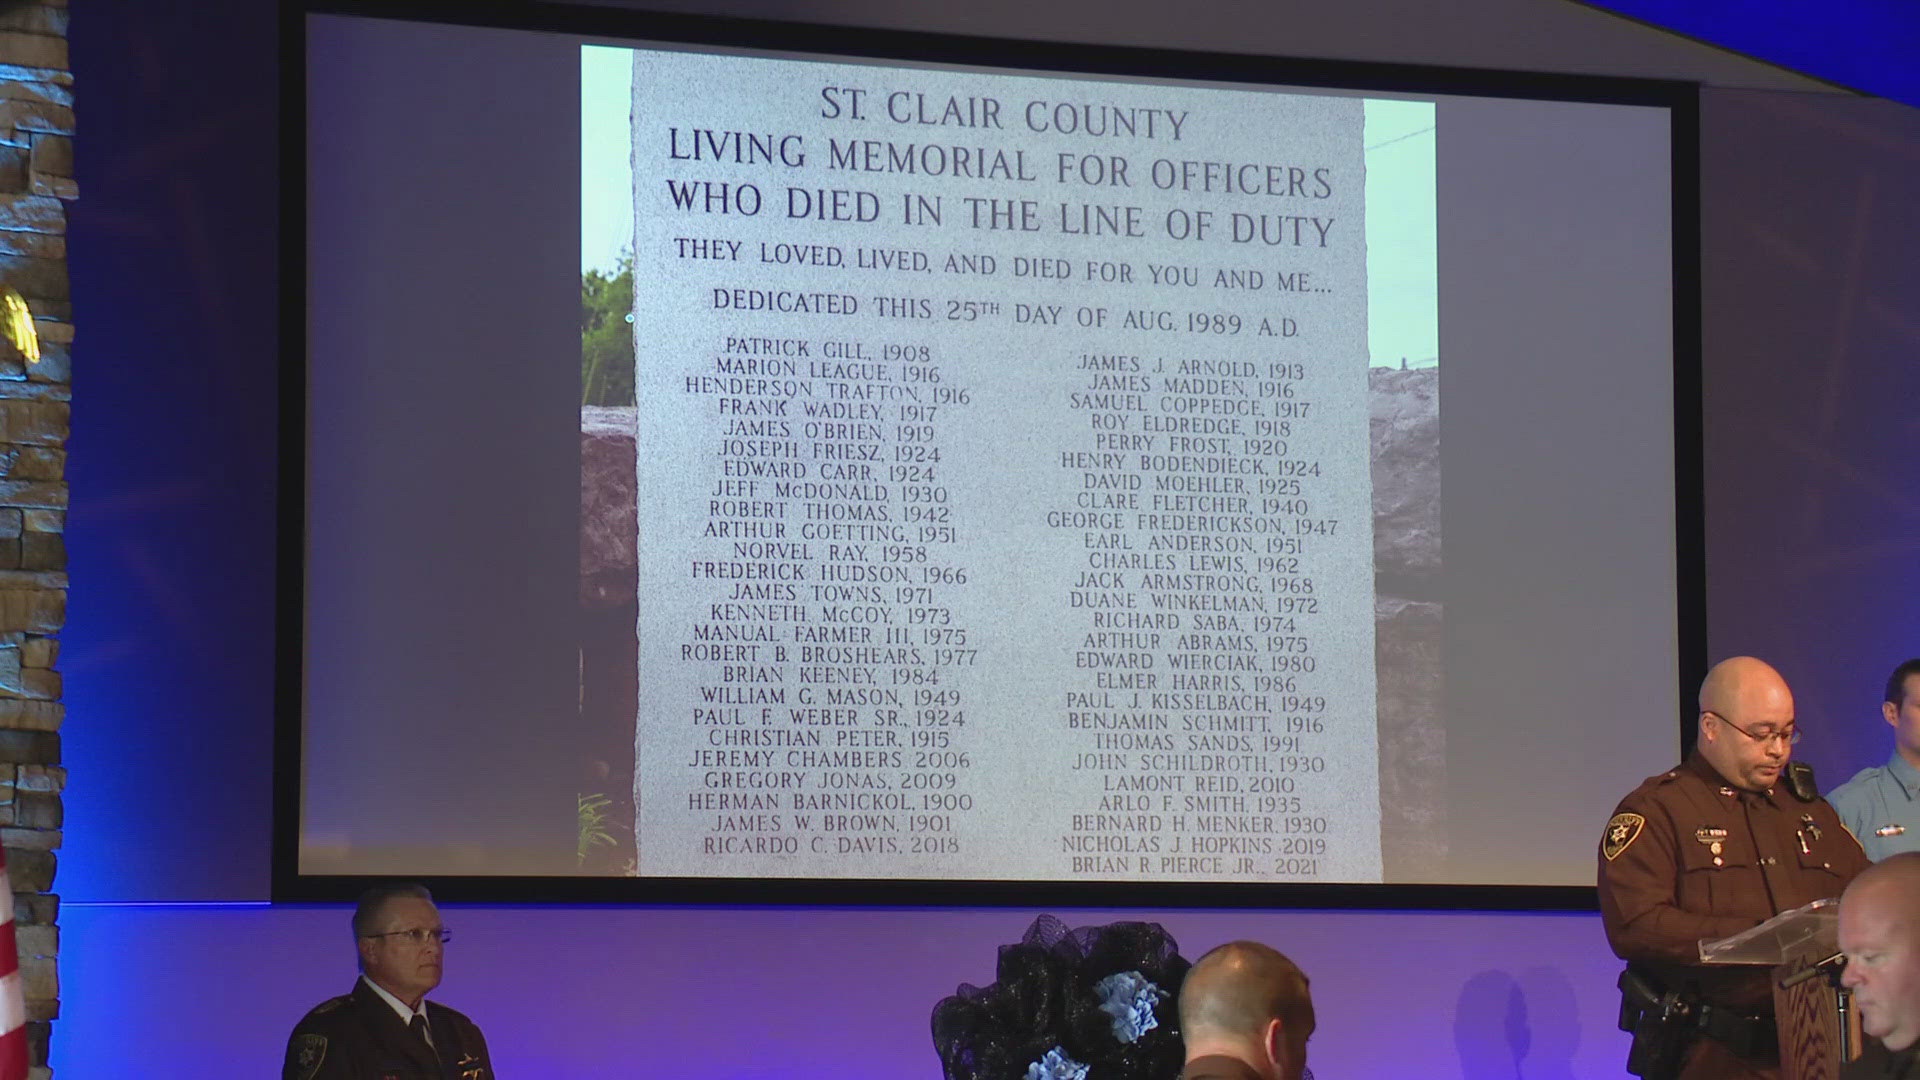 St. Clair County officers killed in the line of duty were remembered for their service Tuesday. The names of dozens of officers dating back to 1908 were read.